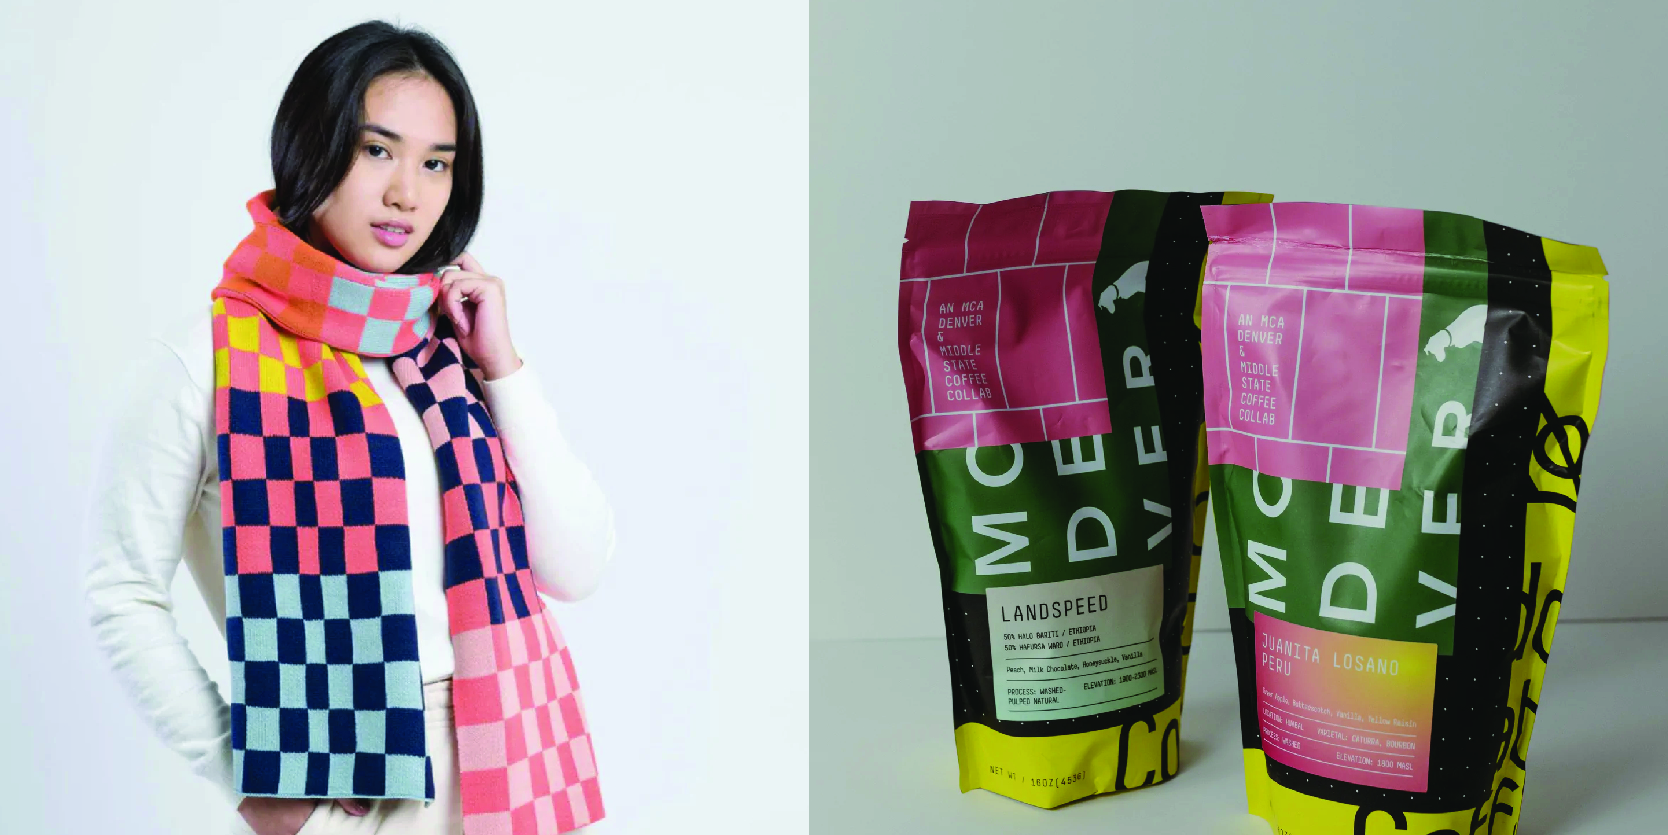 Two photos: one of a model wearing a scarf and one of coffee in a colorful bag.